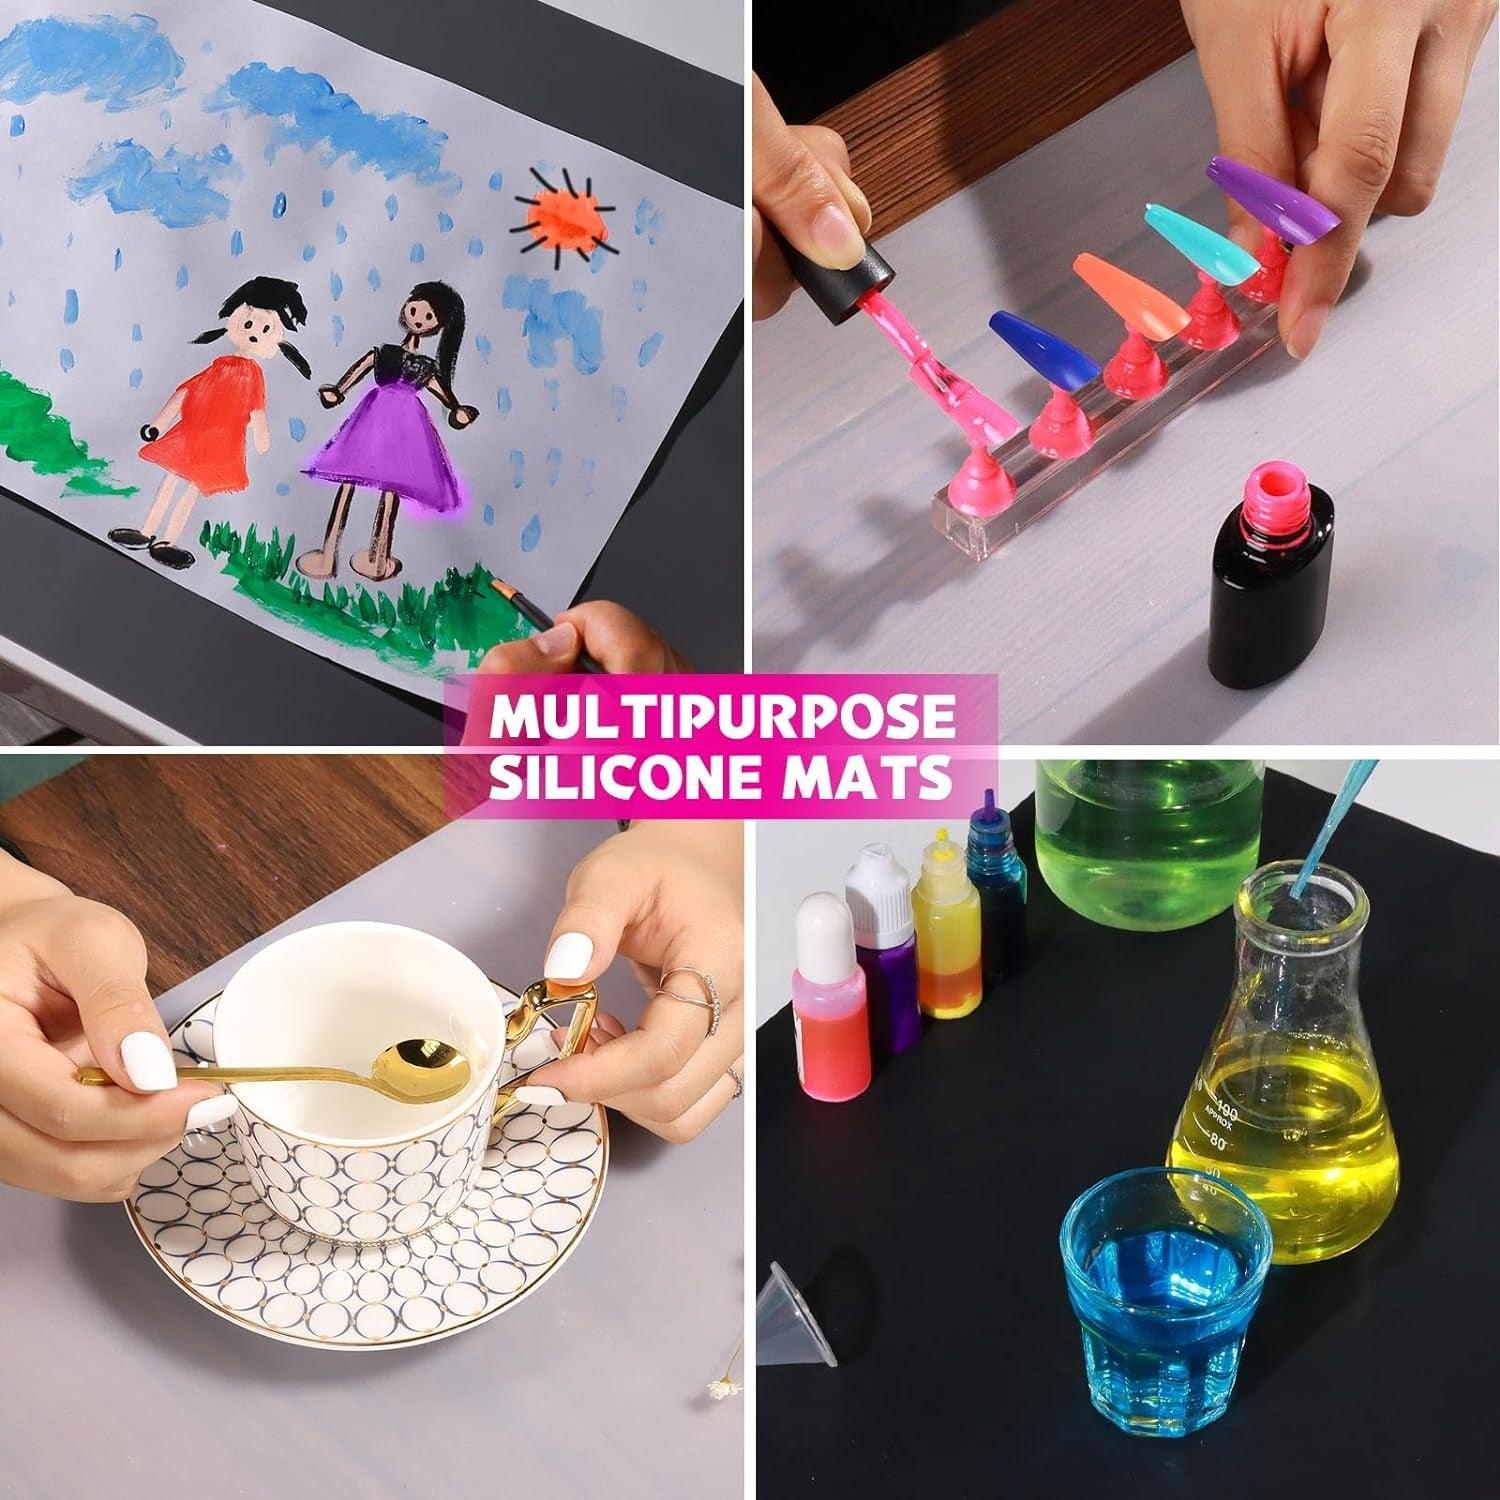 LET'S RESIN 3Pcs Silicone Mat for Crafts, 15.7 x 11.7 Nonstick & Nonslip  Silicone Crafts Mat, Multipurpose Heat-Resistant Table Protector Silicone